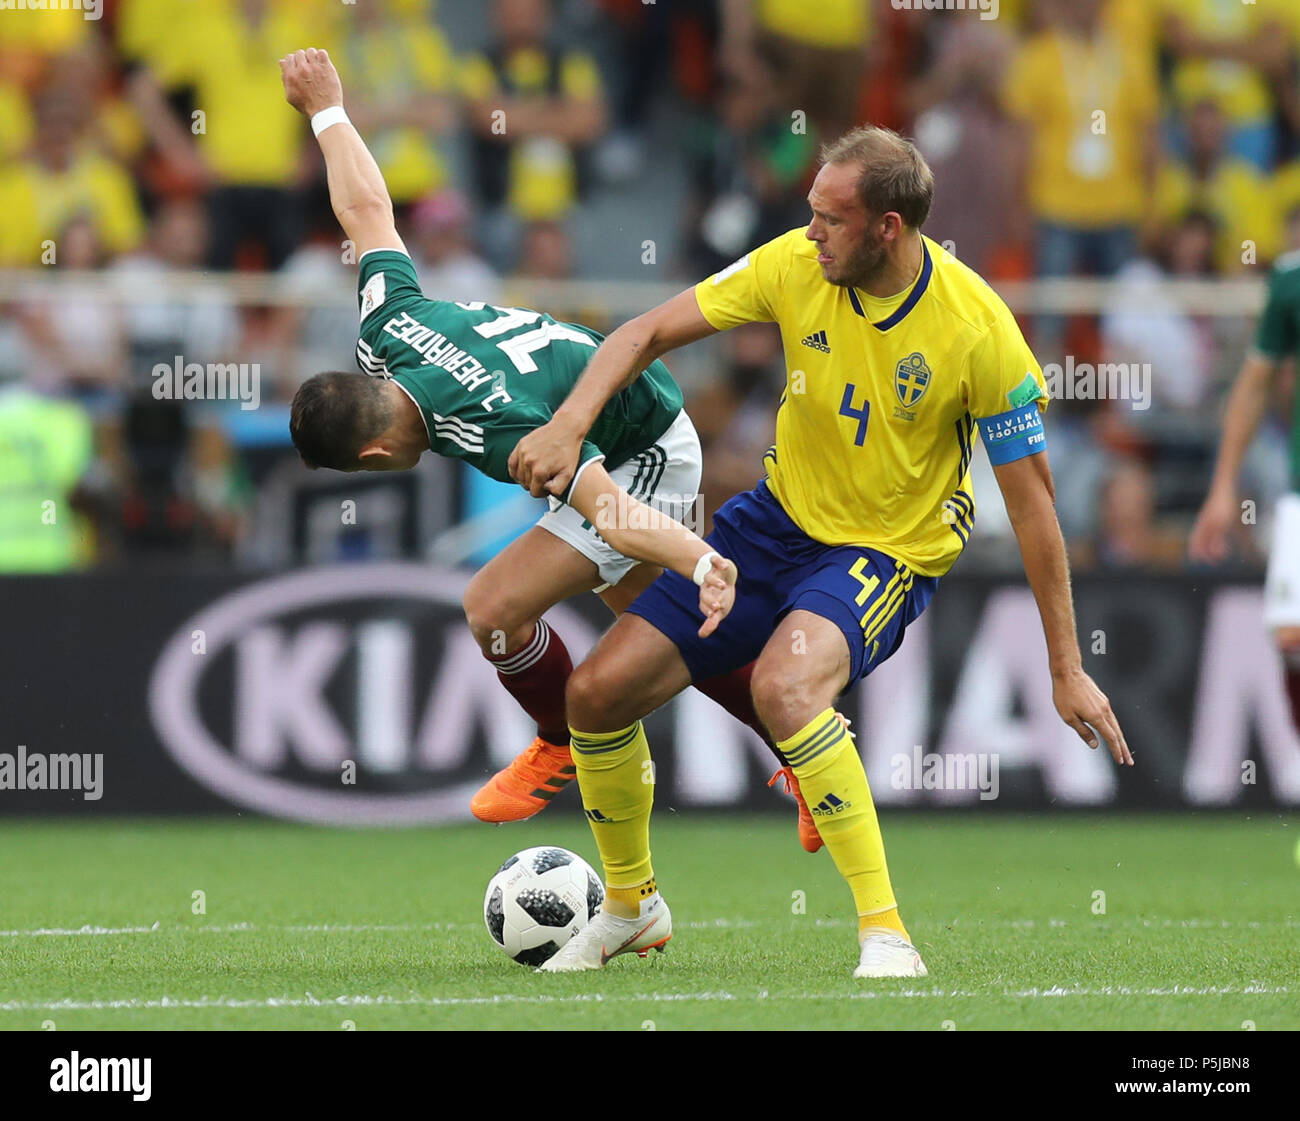 Yekaterinburg, Russia. 27th June, 2018. Javier Hernandez (L) of Mexico vies with Andreas Granqvist of Sweden during the 2018 FIFA World Cup Group F match between Mexico and Sweden in Yekaterinburg, Russia, June 27, 2018. Credit: Lu Jinbo/Xinhua/Alamy Live News Stock Photo